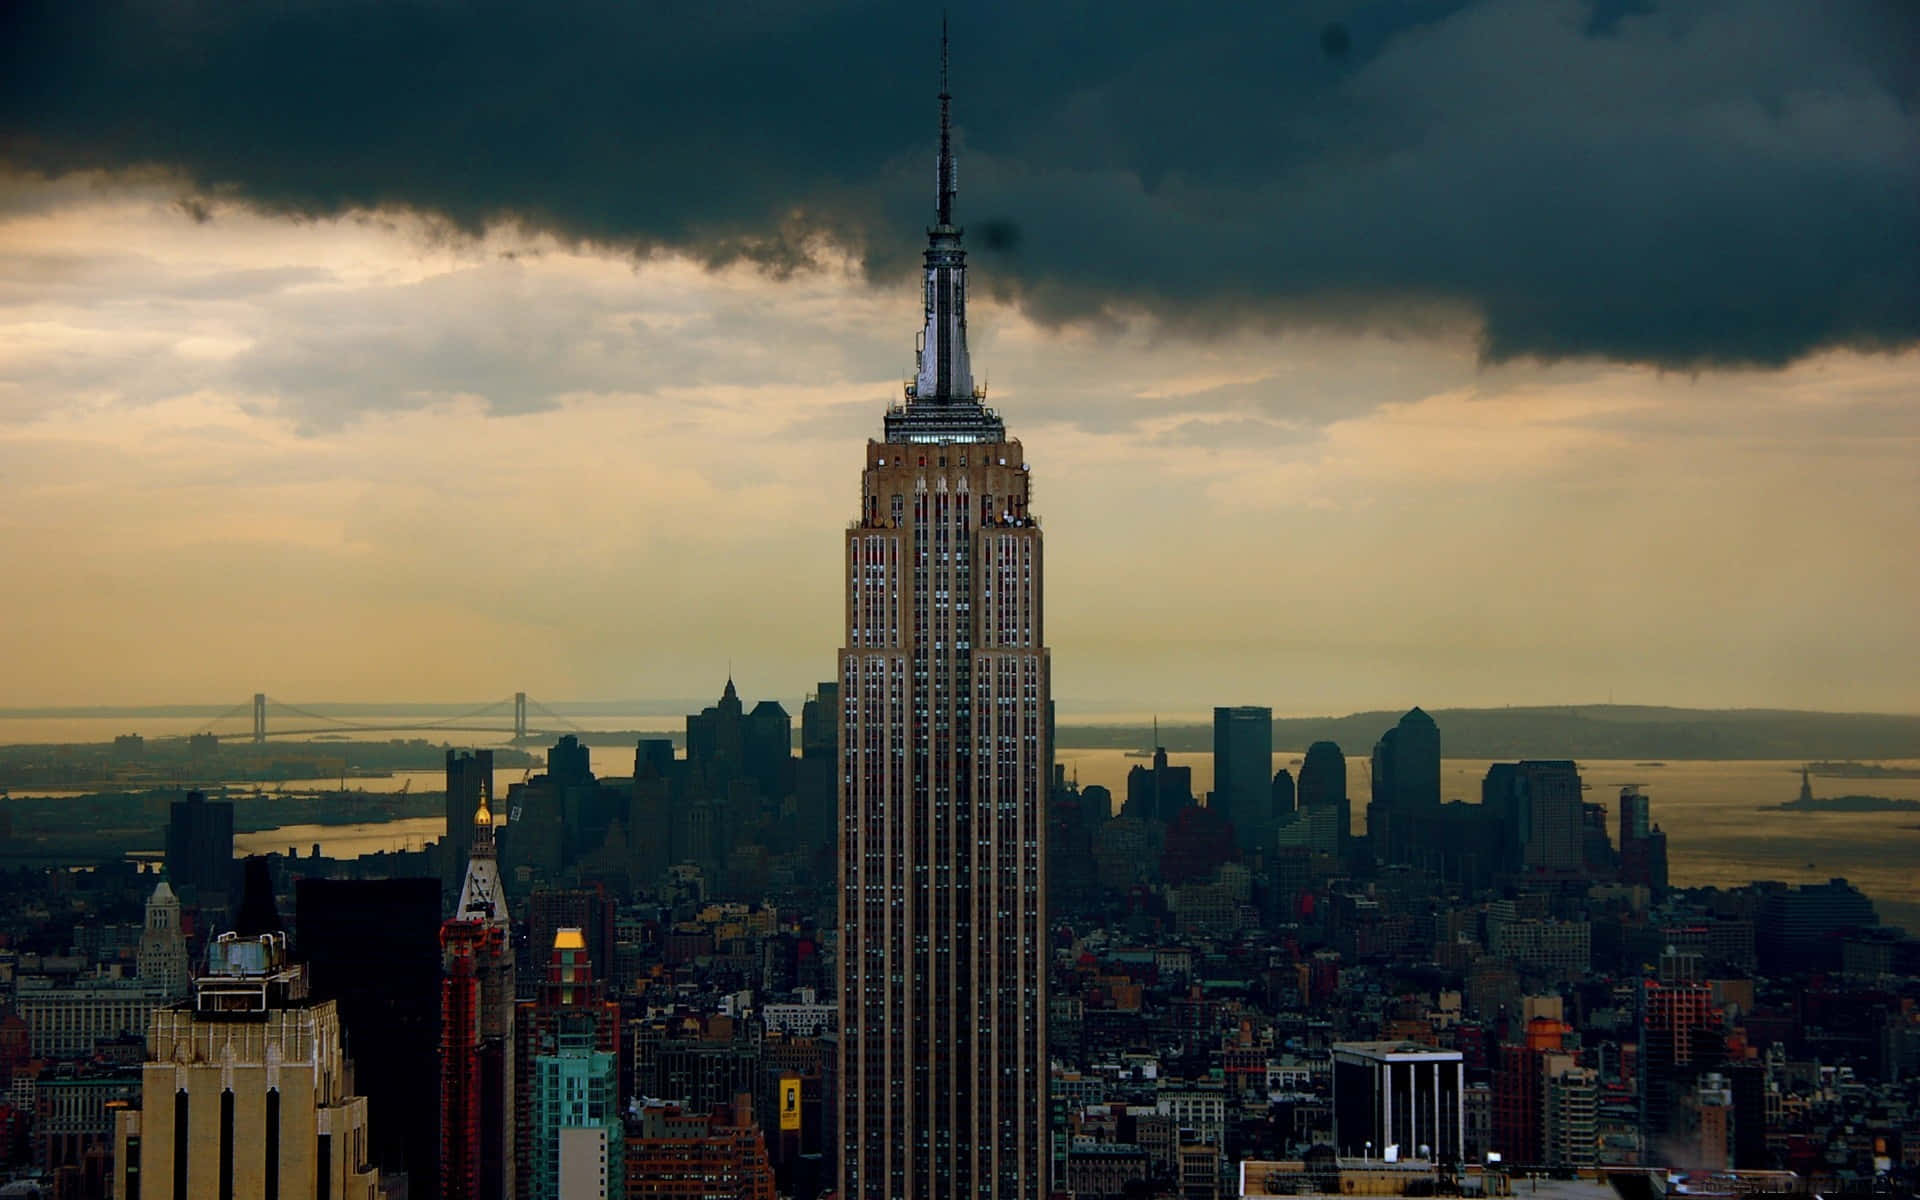 An Amazing View of the Empire State Building